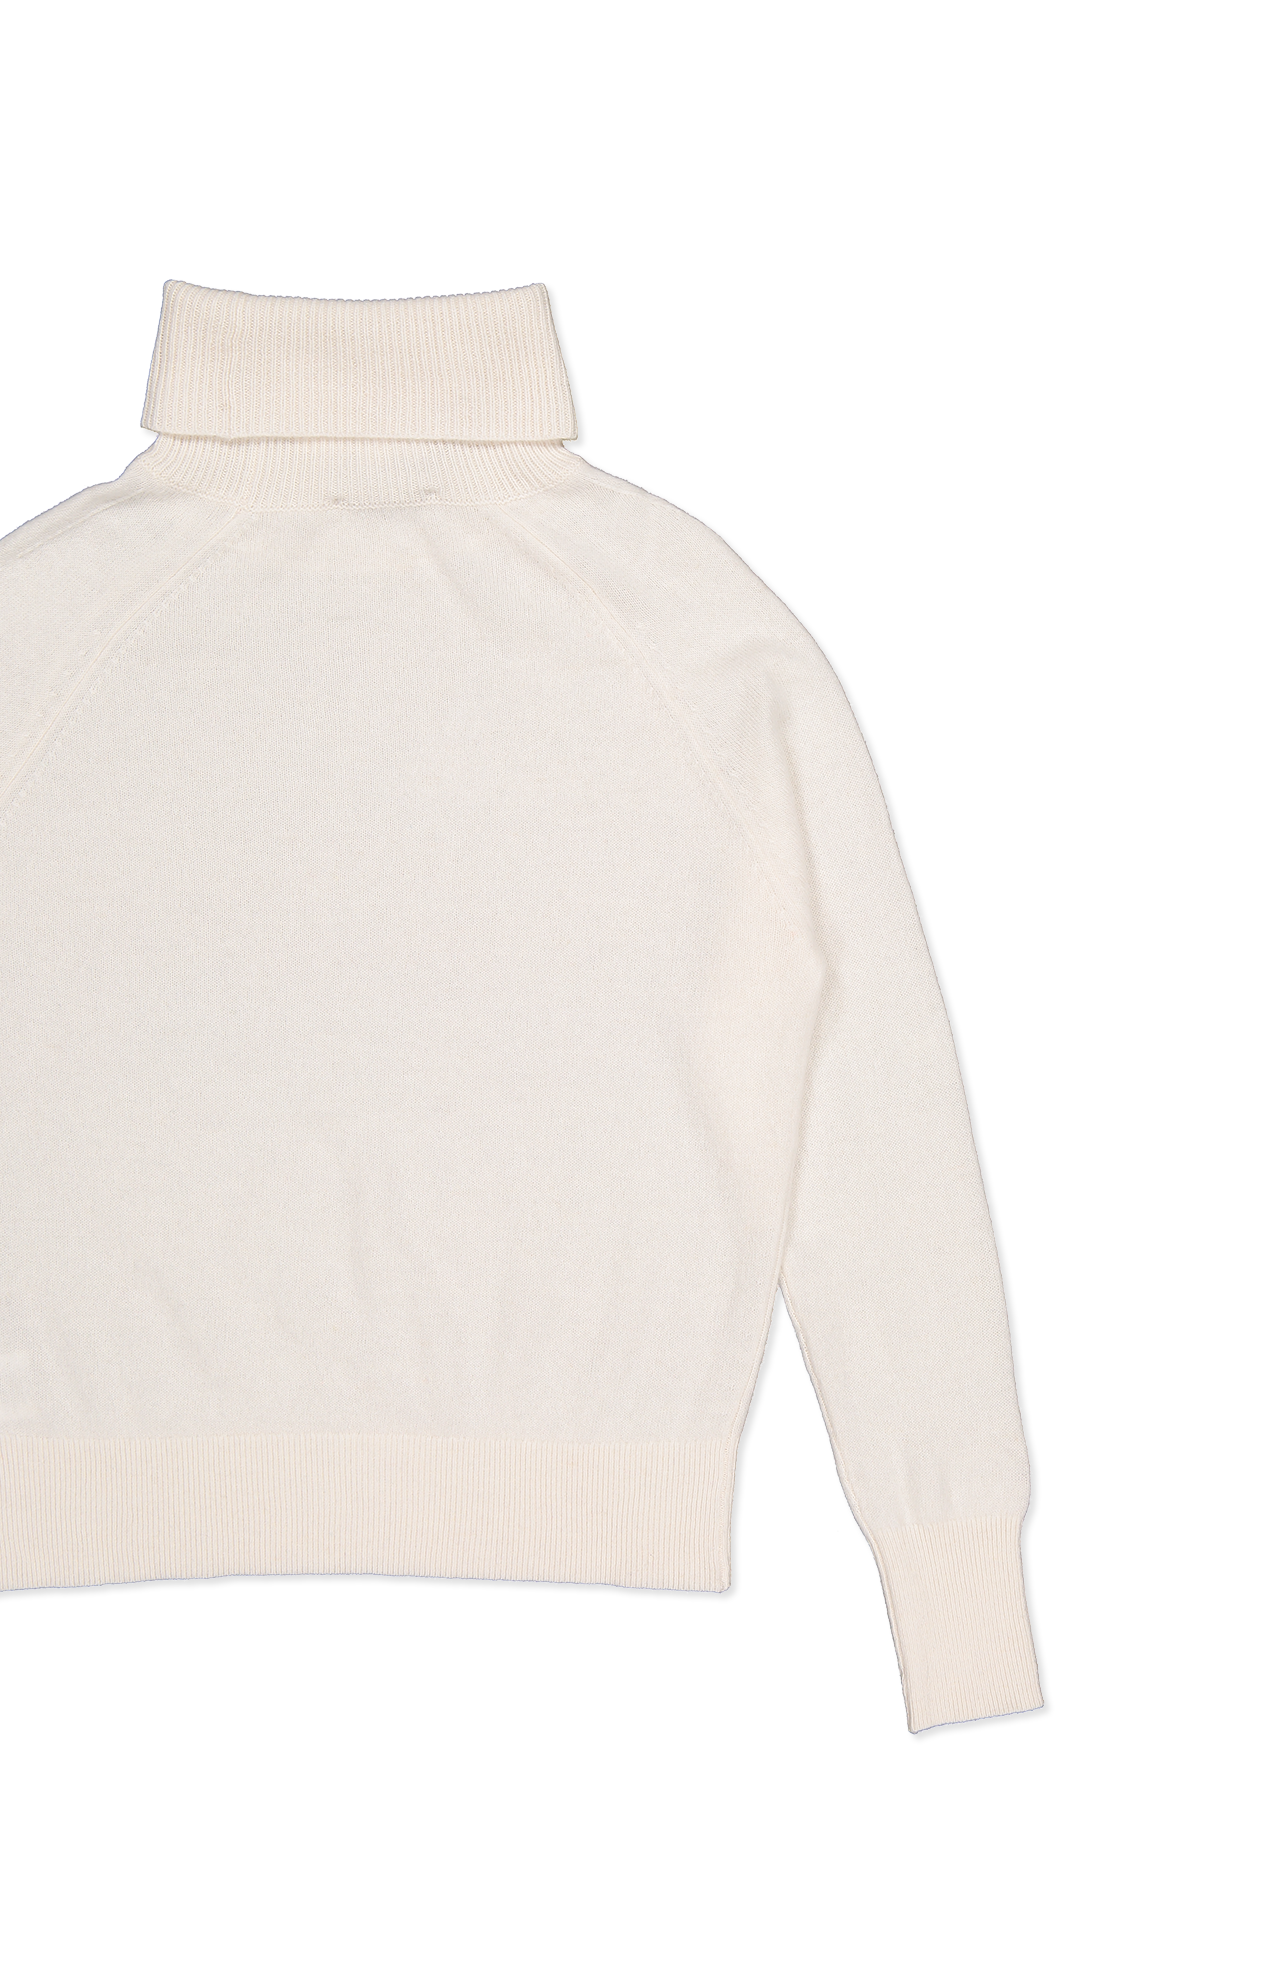 White And Warren Cashmere Essential Turtleneck Sweater Soft White Back Flat Lay Image (6977567096947)